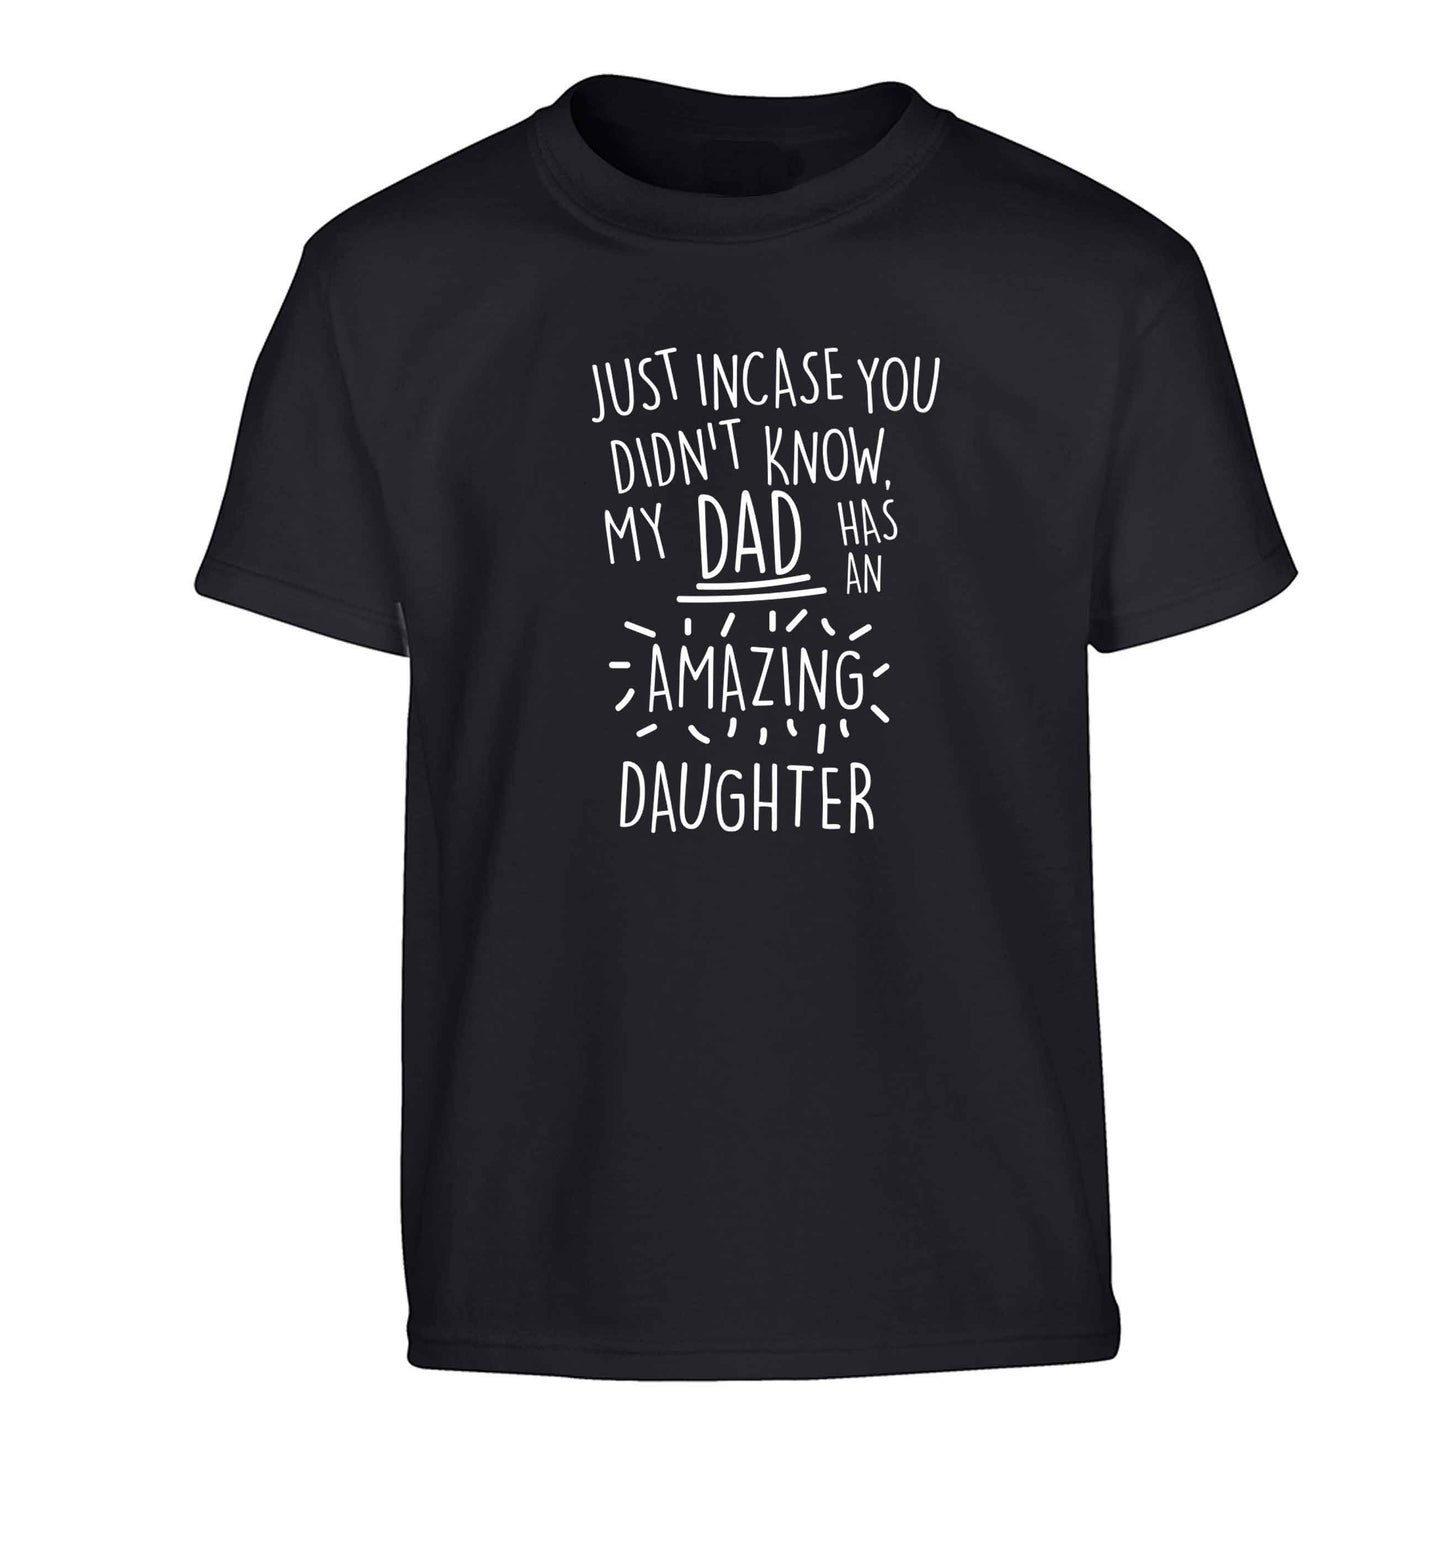 Just incase you didn't know my dad has an amazing daughter Children's black Tshirt 12-13 Years